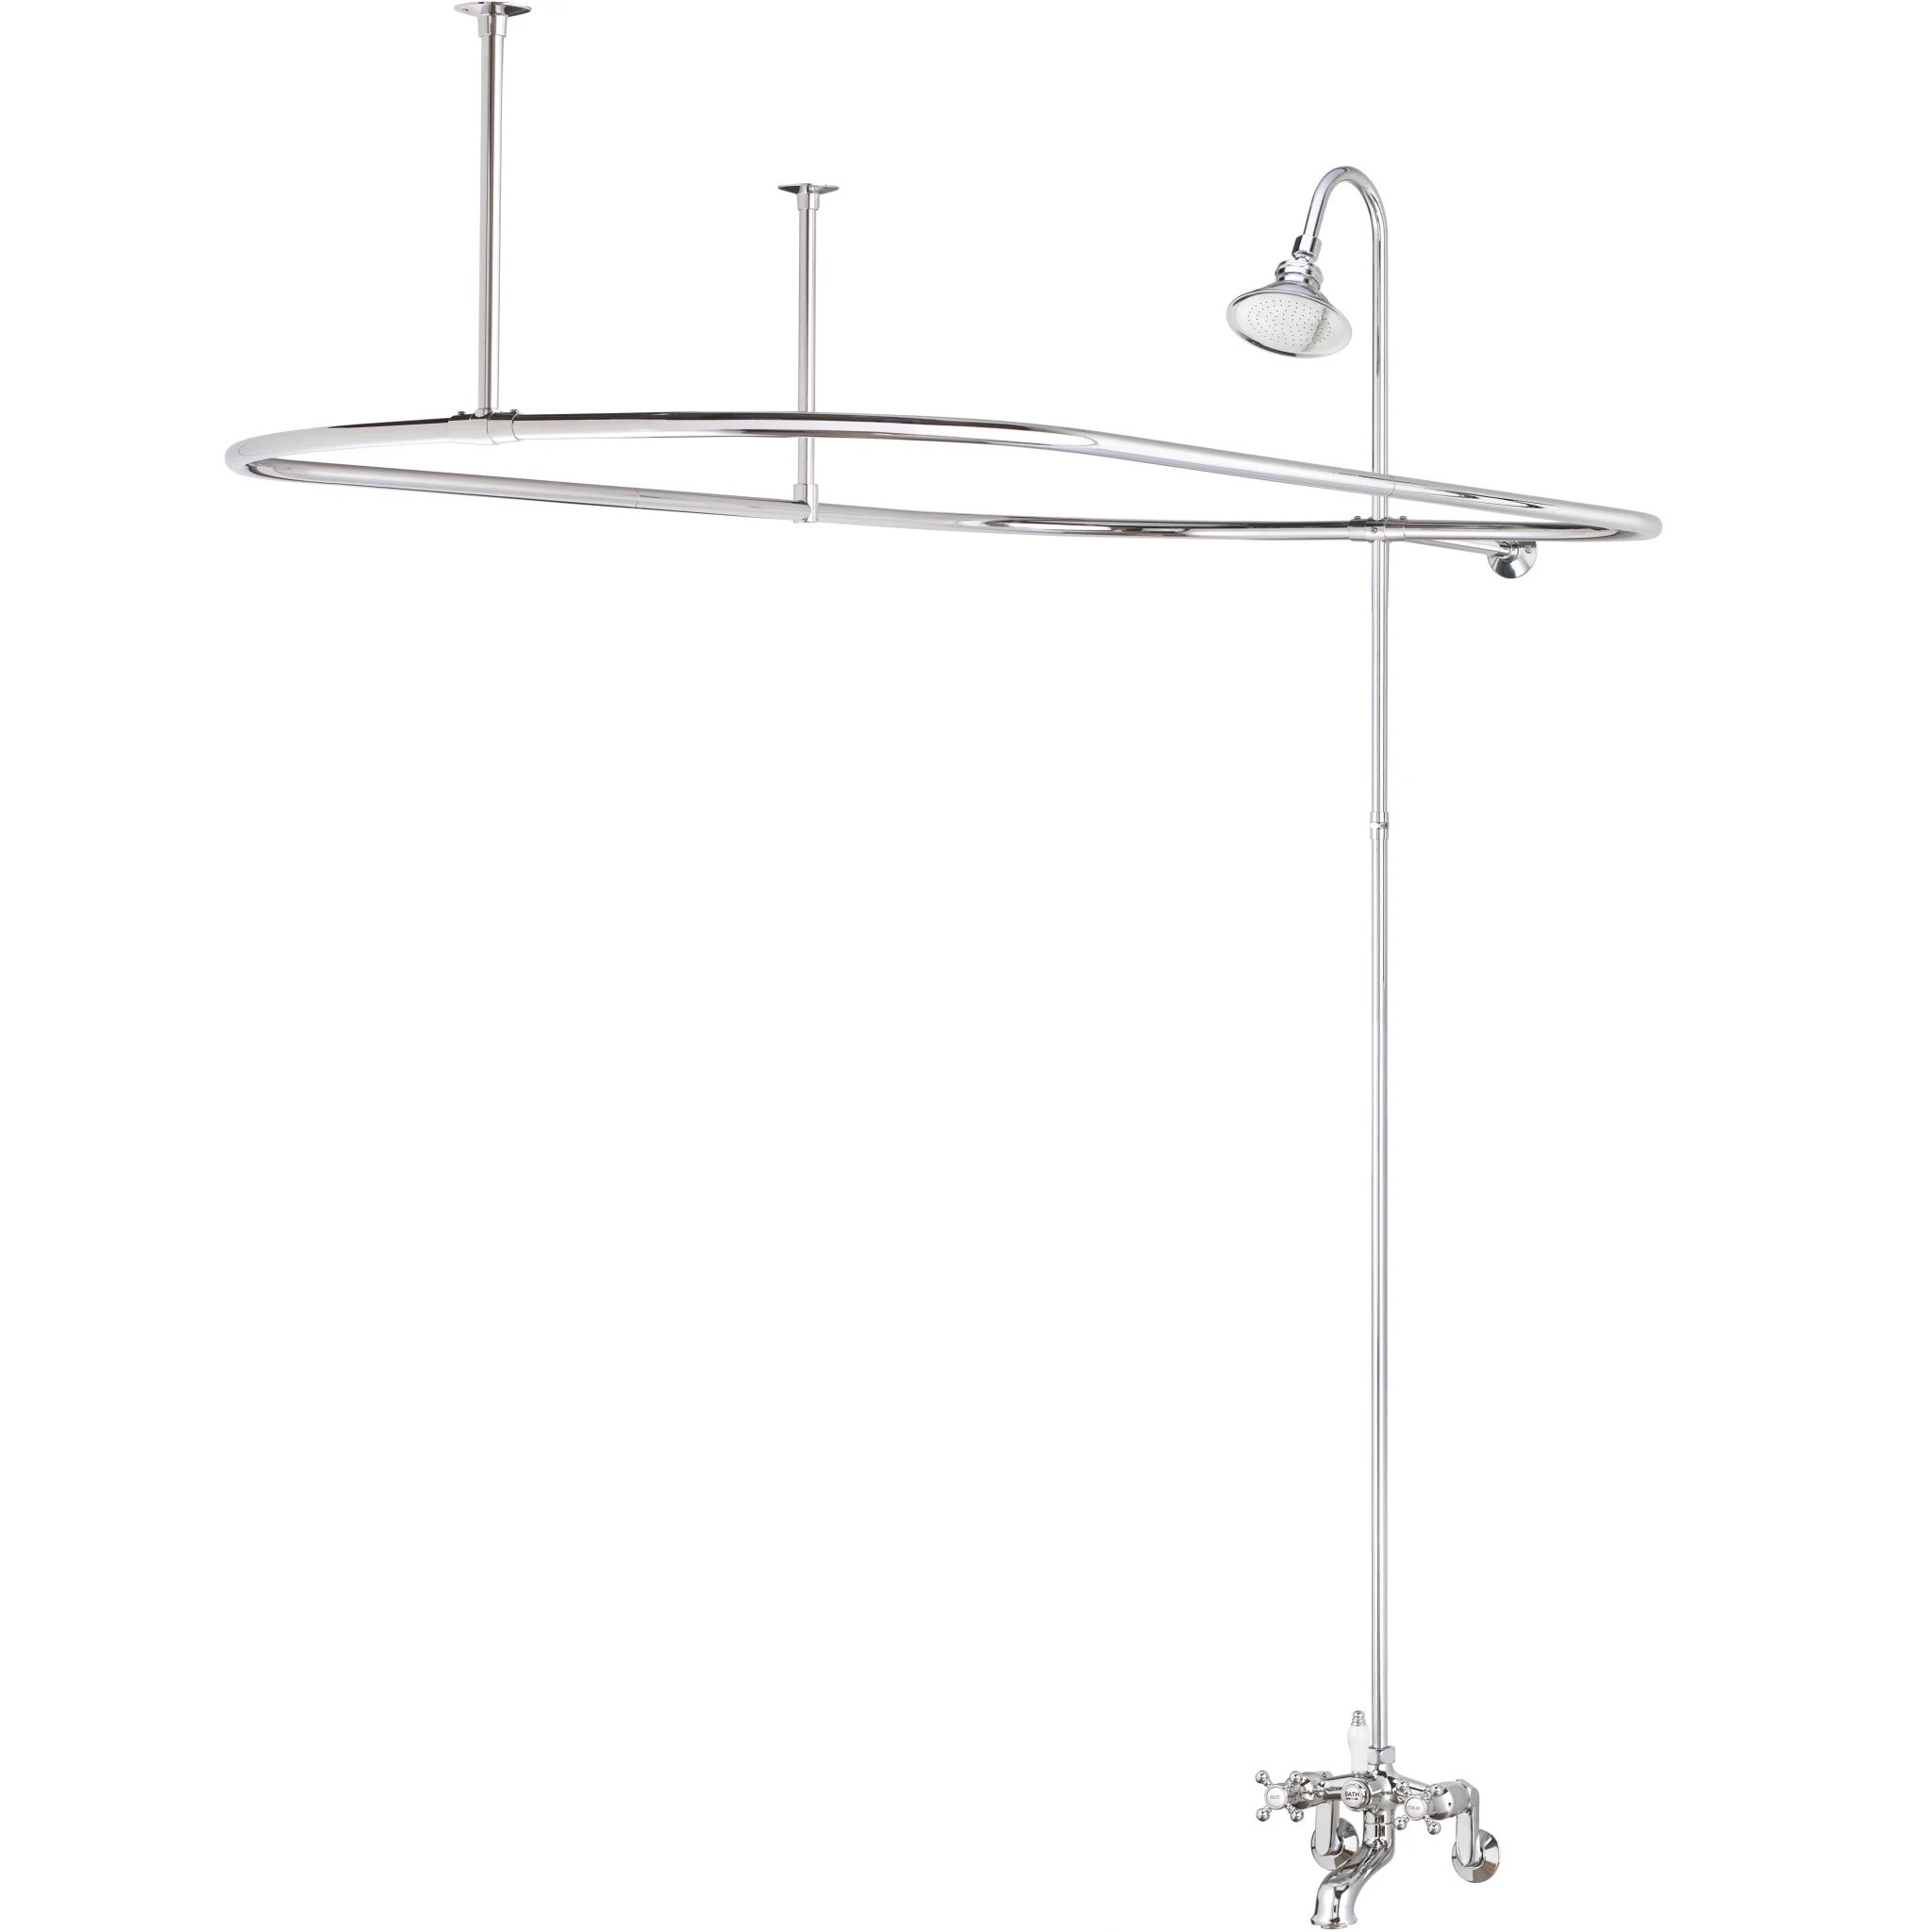 CHEVIOT 5182 CROSS HANDLES WALL-MOUNT TUB FILLER AND SHOWER COMBINATION WITH SHOWER CURTAIN